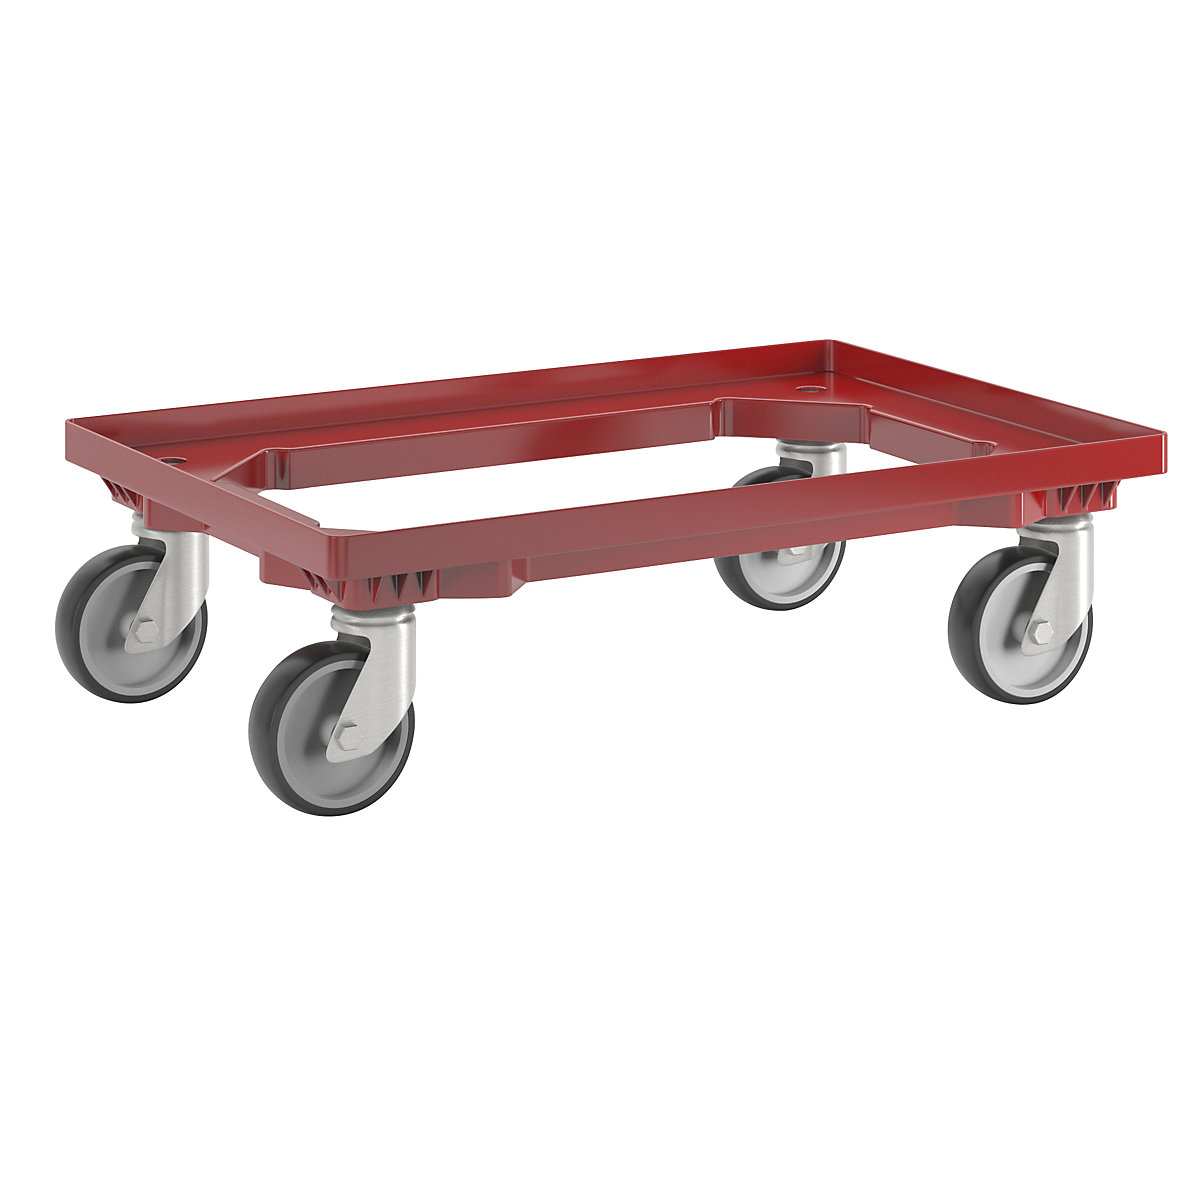 Professional wheeled base, 600 x 400 mm – eurokraft basic, 4 swivel castors with rubber tyres, red-7